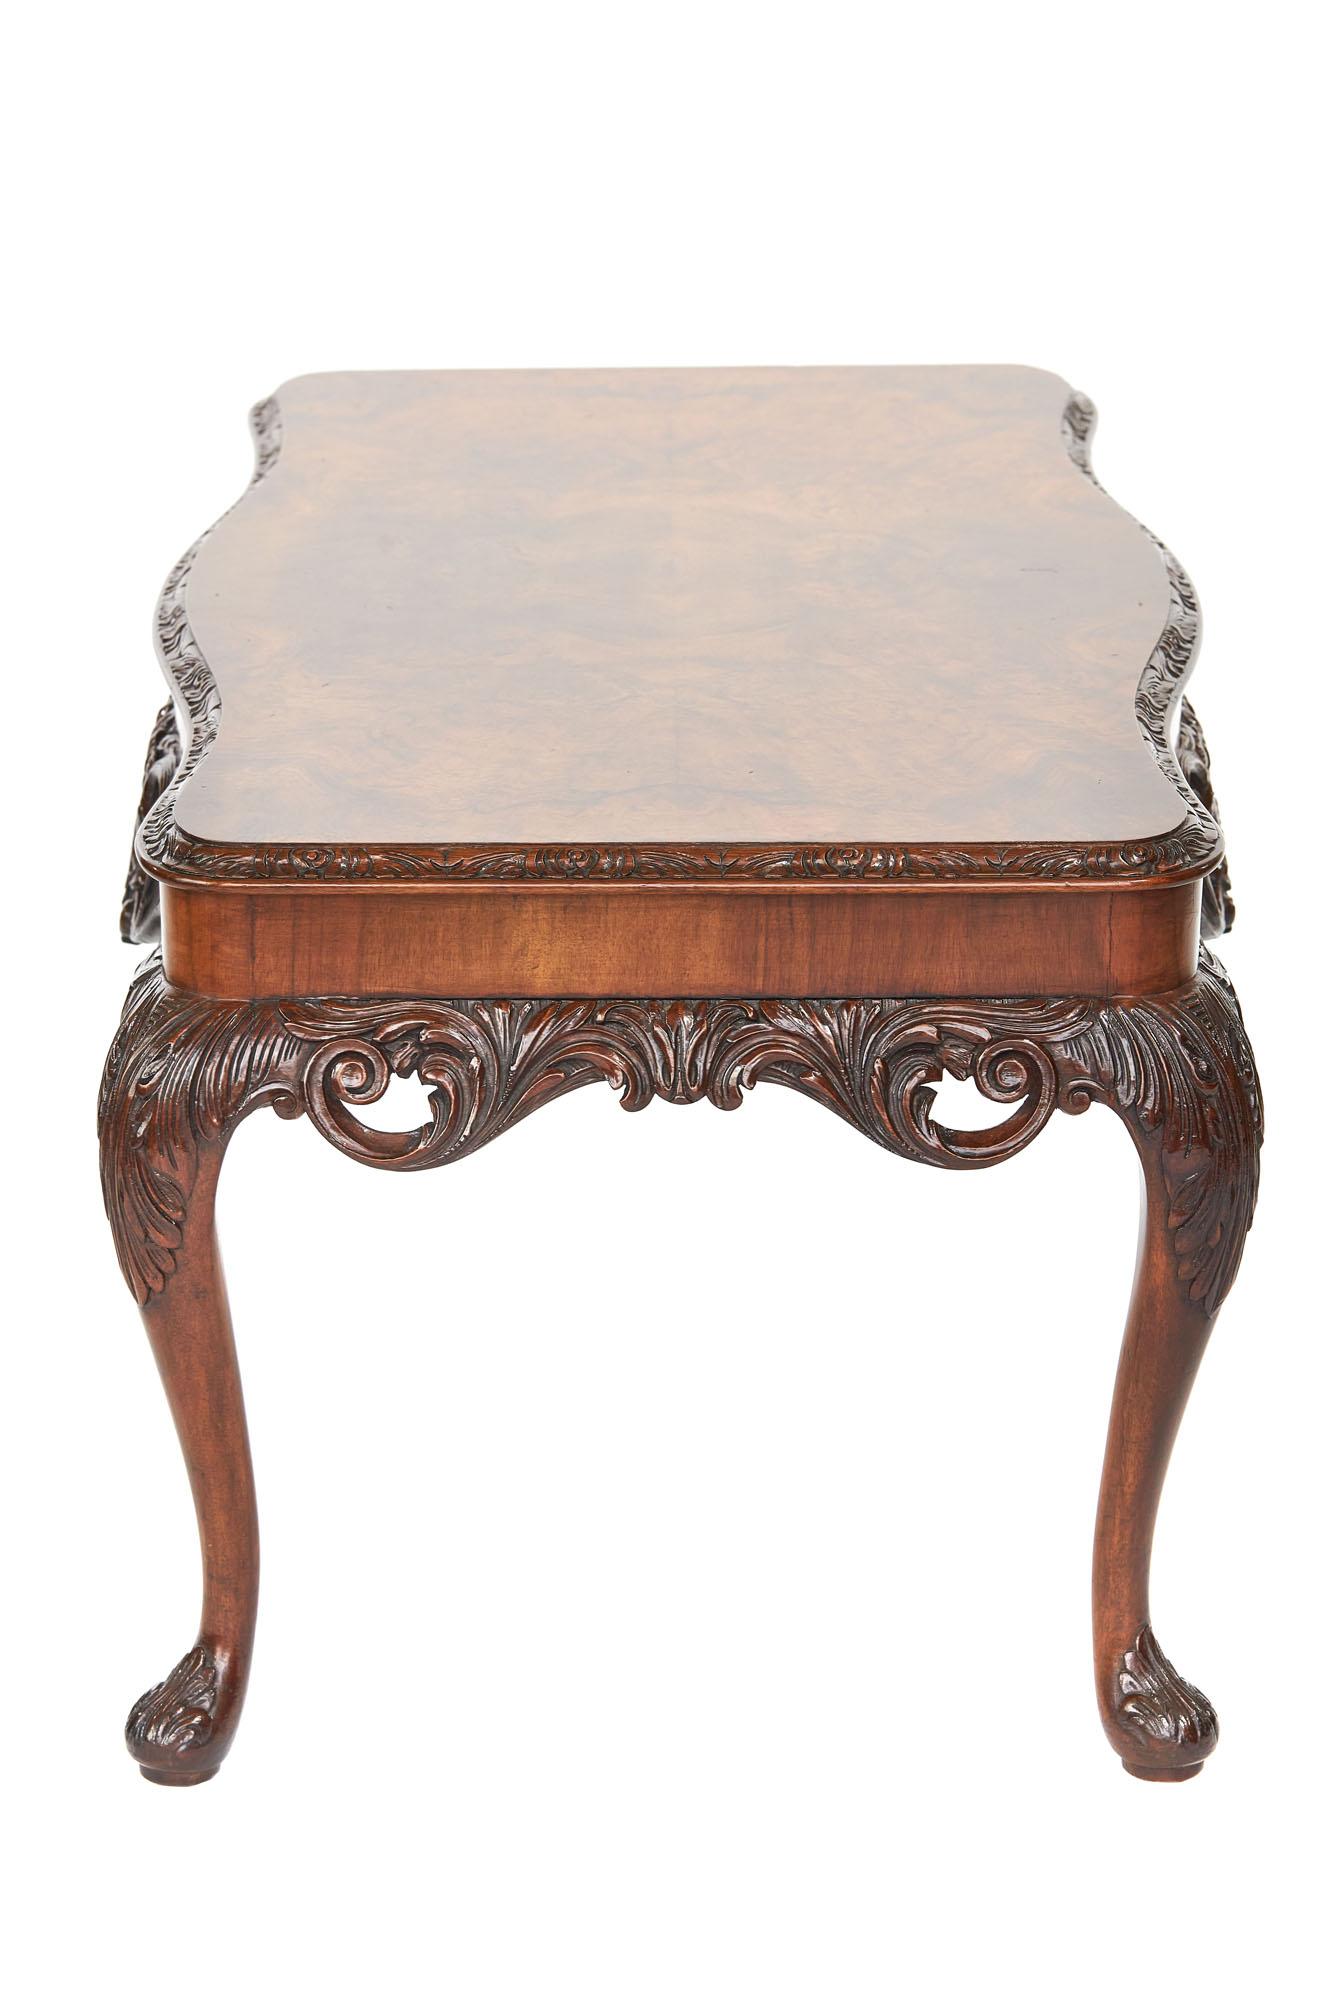 20th Century Antique Carved Burr Walnut Coffee Table